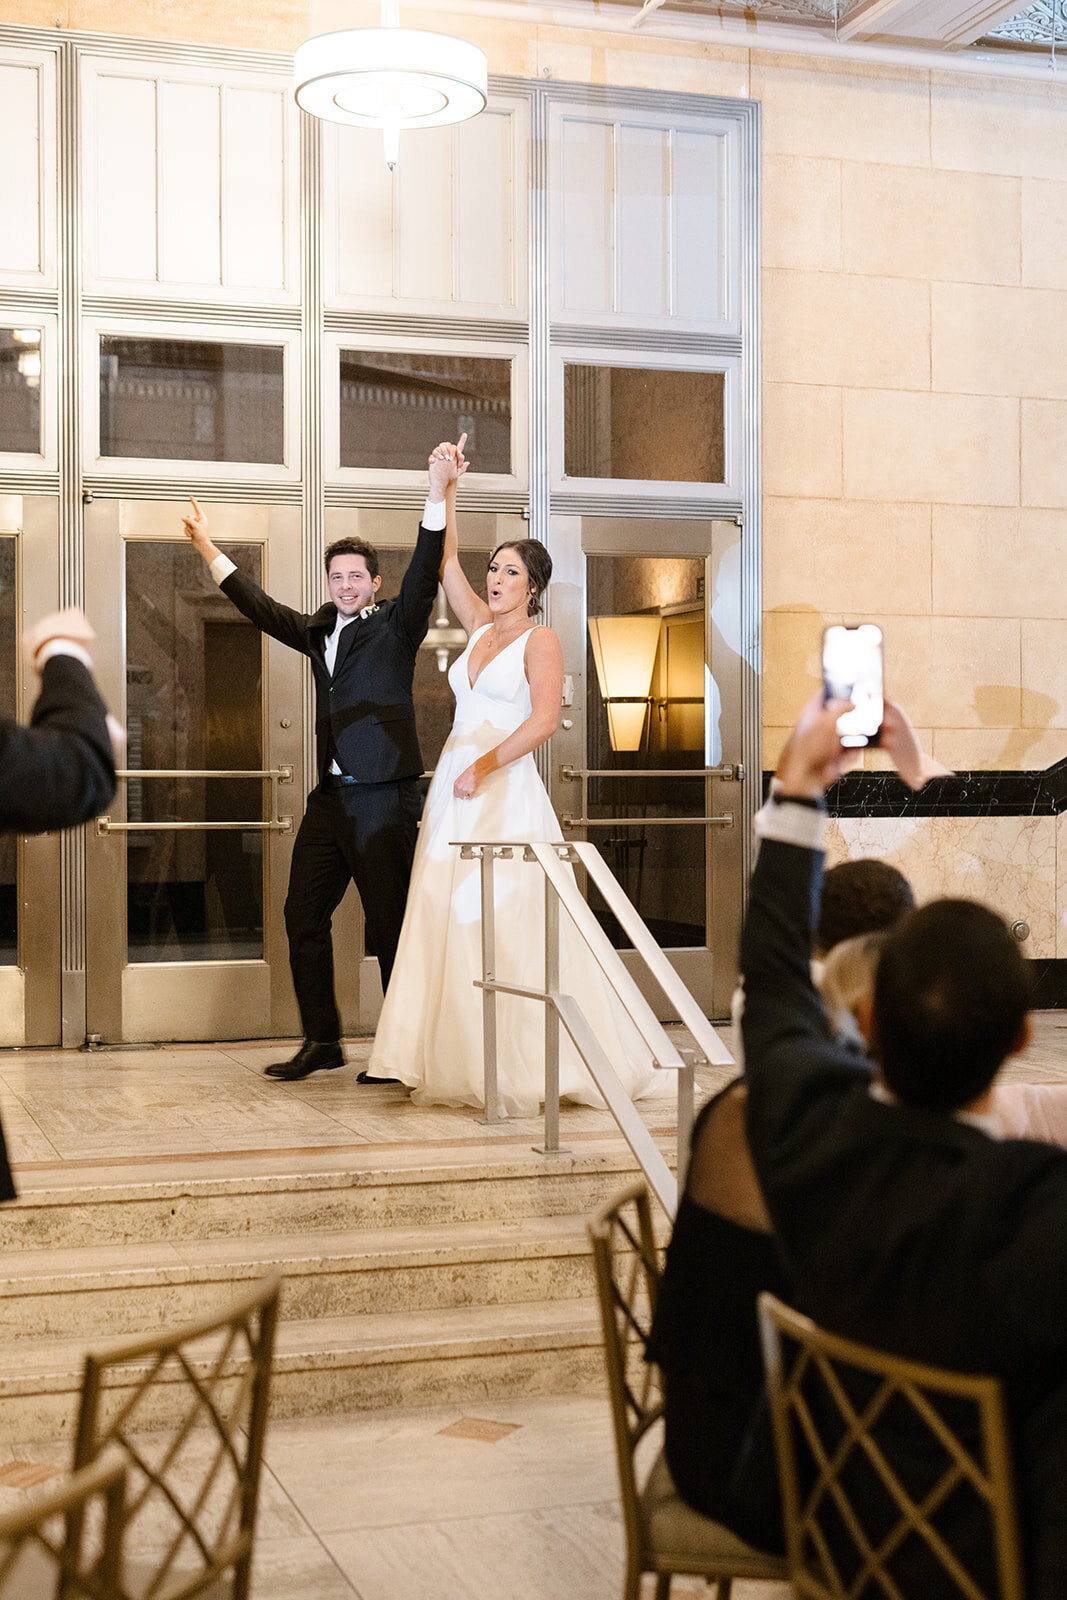 Kylie and Jack at The Grand Hall - Kansas City Wedding Photograpy - Nick and Lexie Photo Film-820